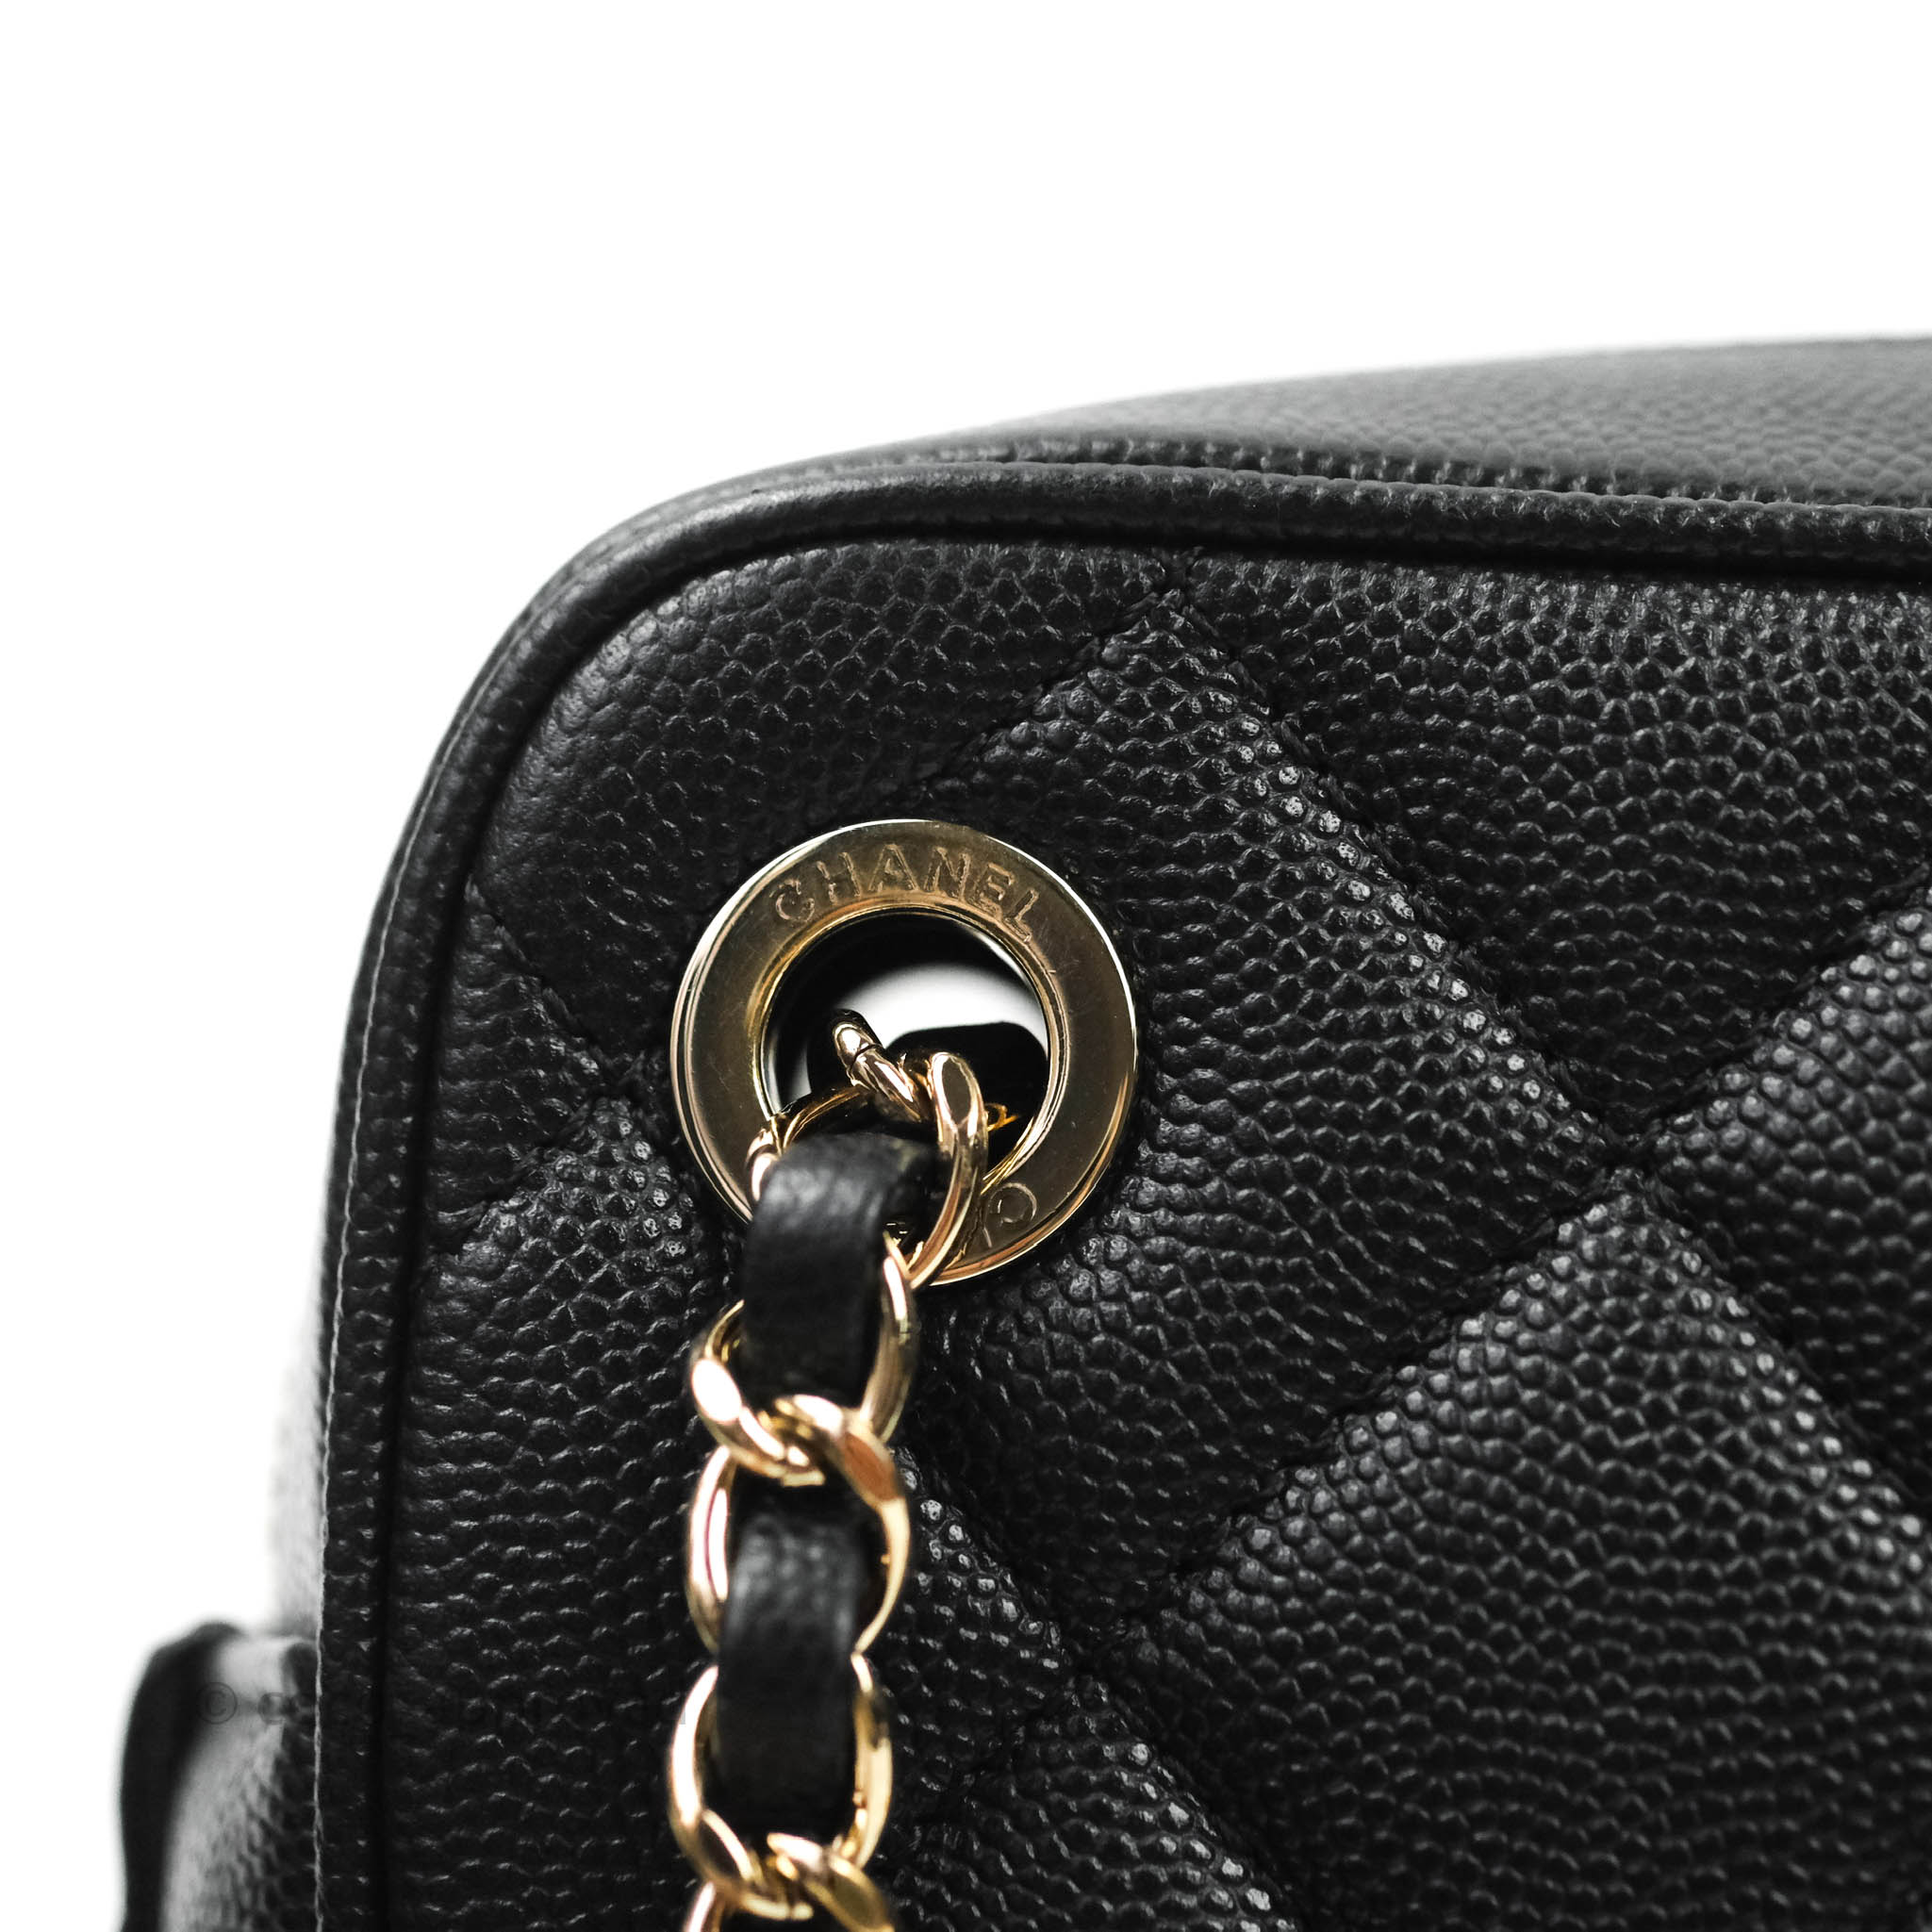 Sold at Auction: Chanel Black and Champagne Chevron Quilted Camera Bag